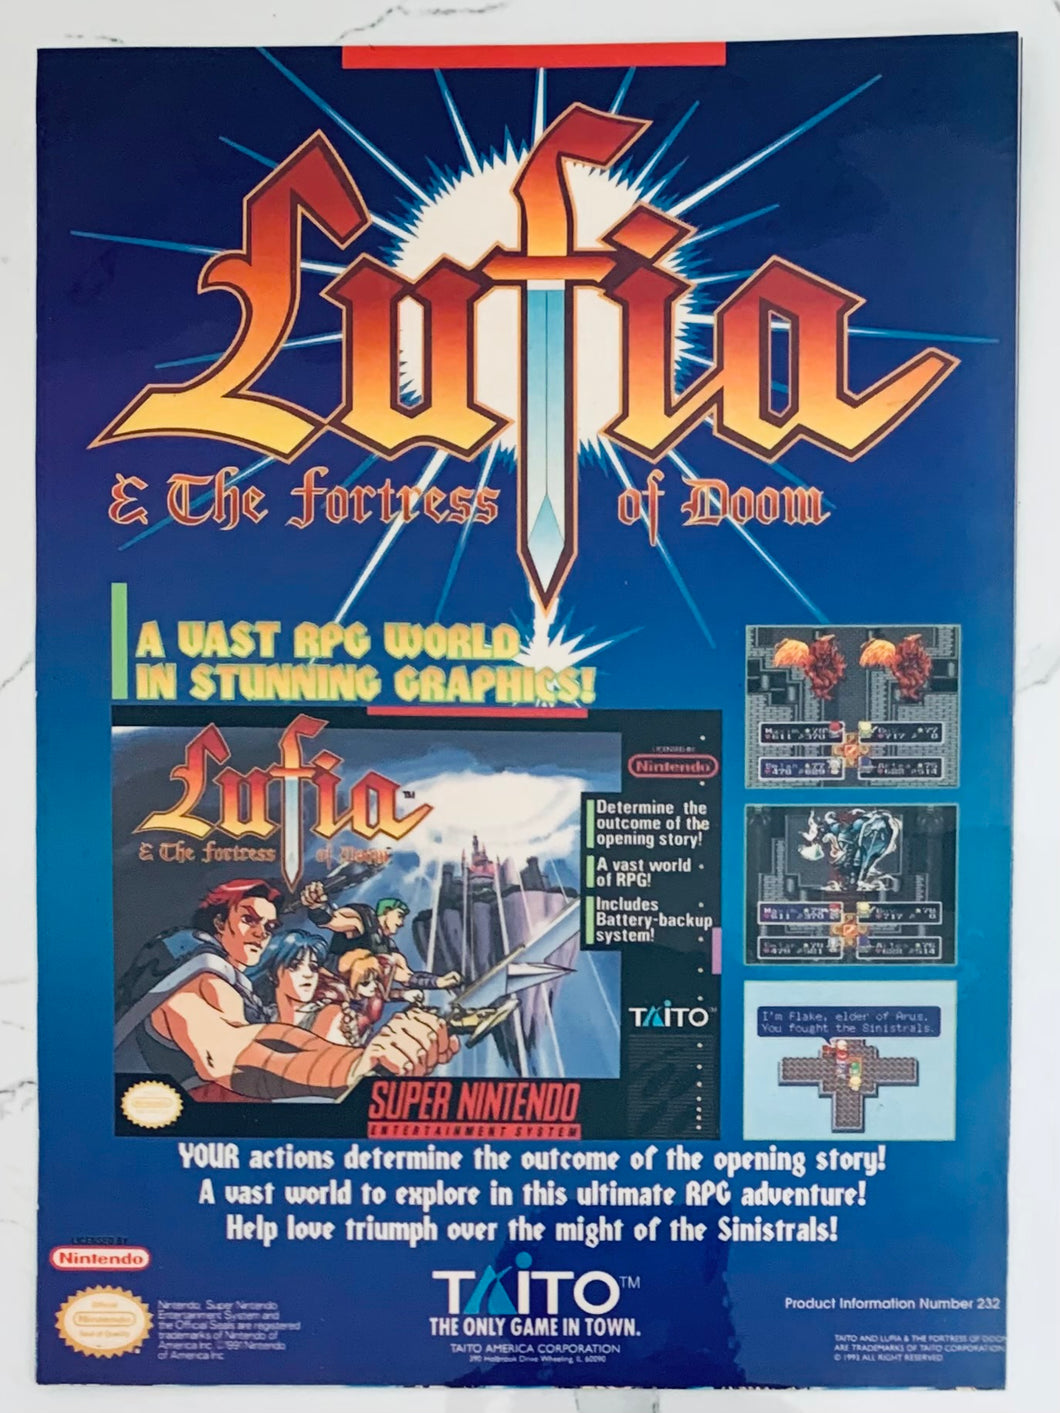 Lufia & the Fortress of Doom - SNES - Original Vintage Advertisement - Print Ads - Laminated A4 Poster